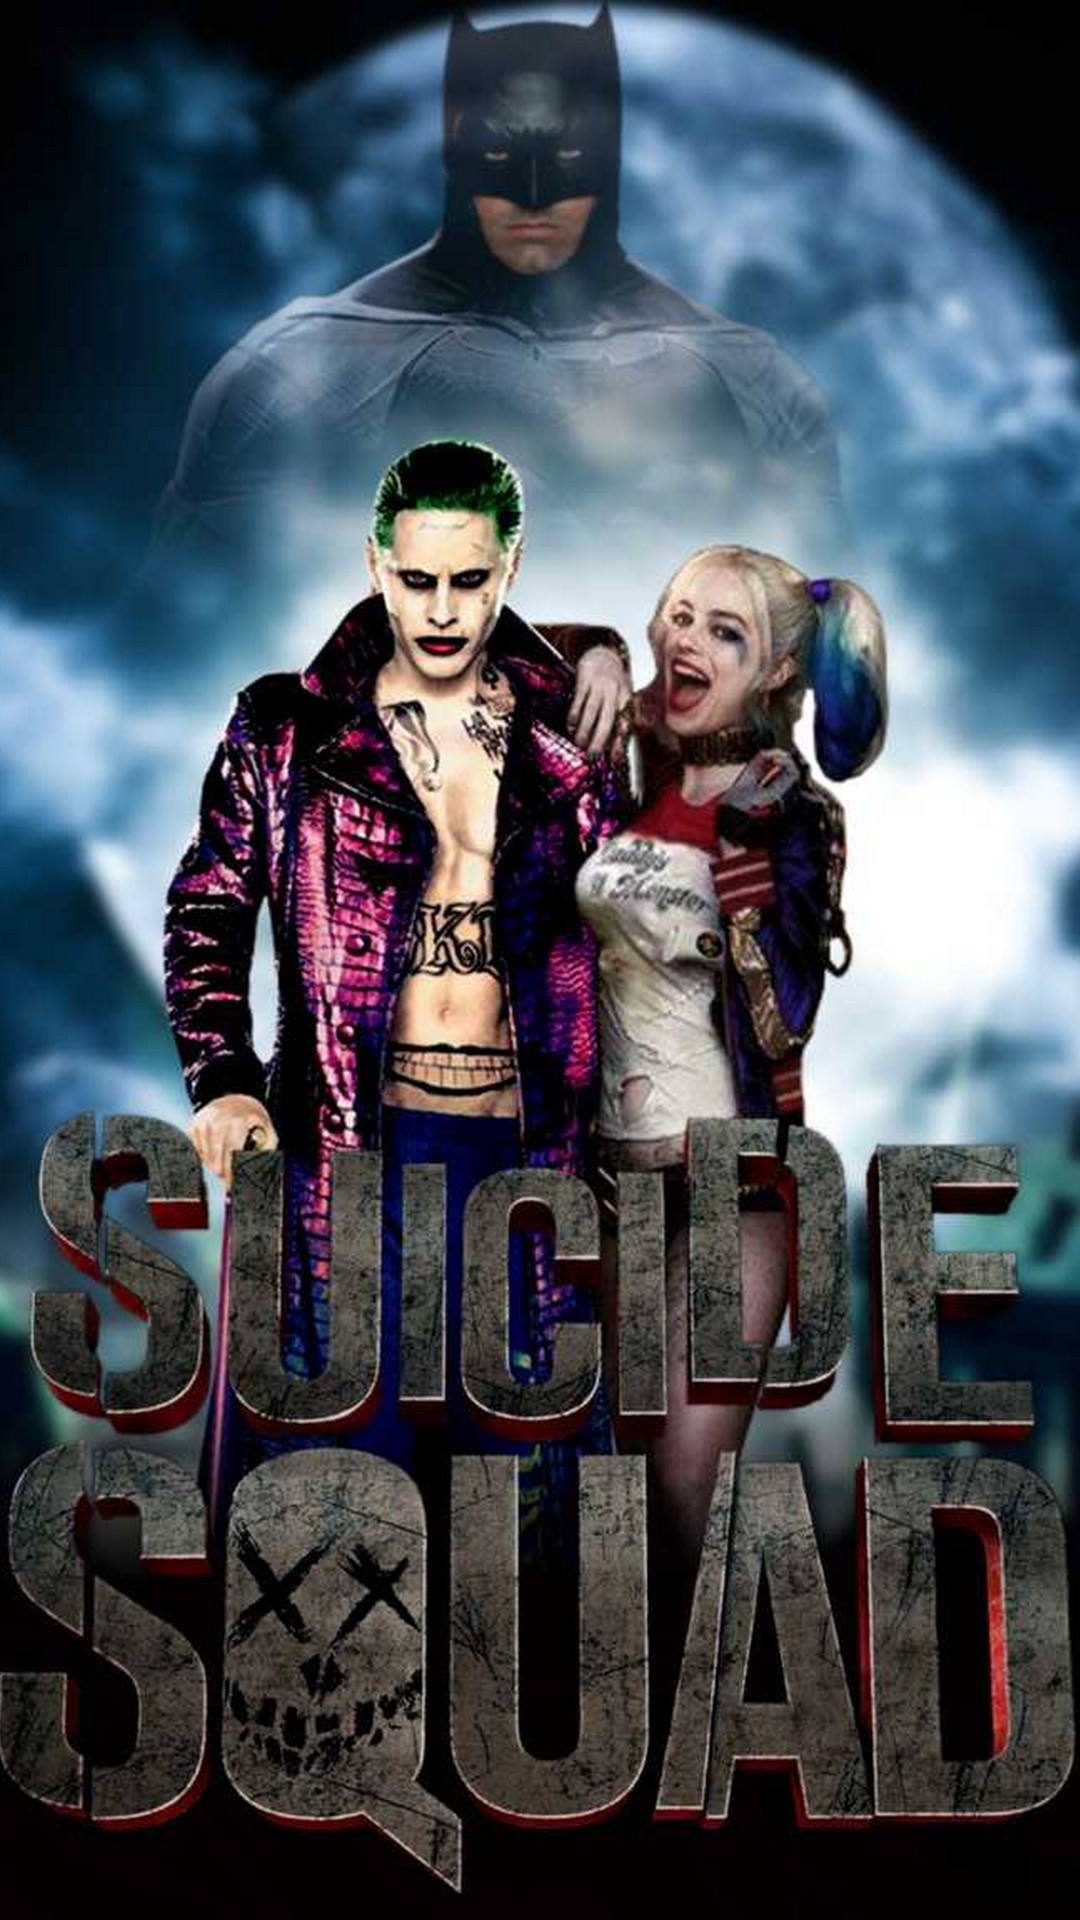 iPhone Wallpaper Harley Quinn and Joker with image resolution 1080x1920 pixel. You can make this wallpaper for your iPhone 5, 6, 7, 8, X backgrounds, Mobile Screensaver, or iPad Lock Screen